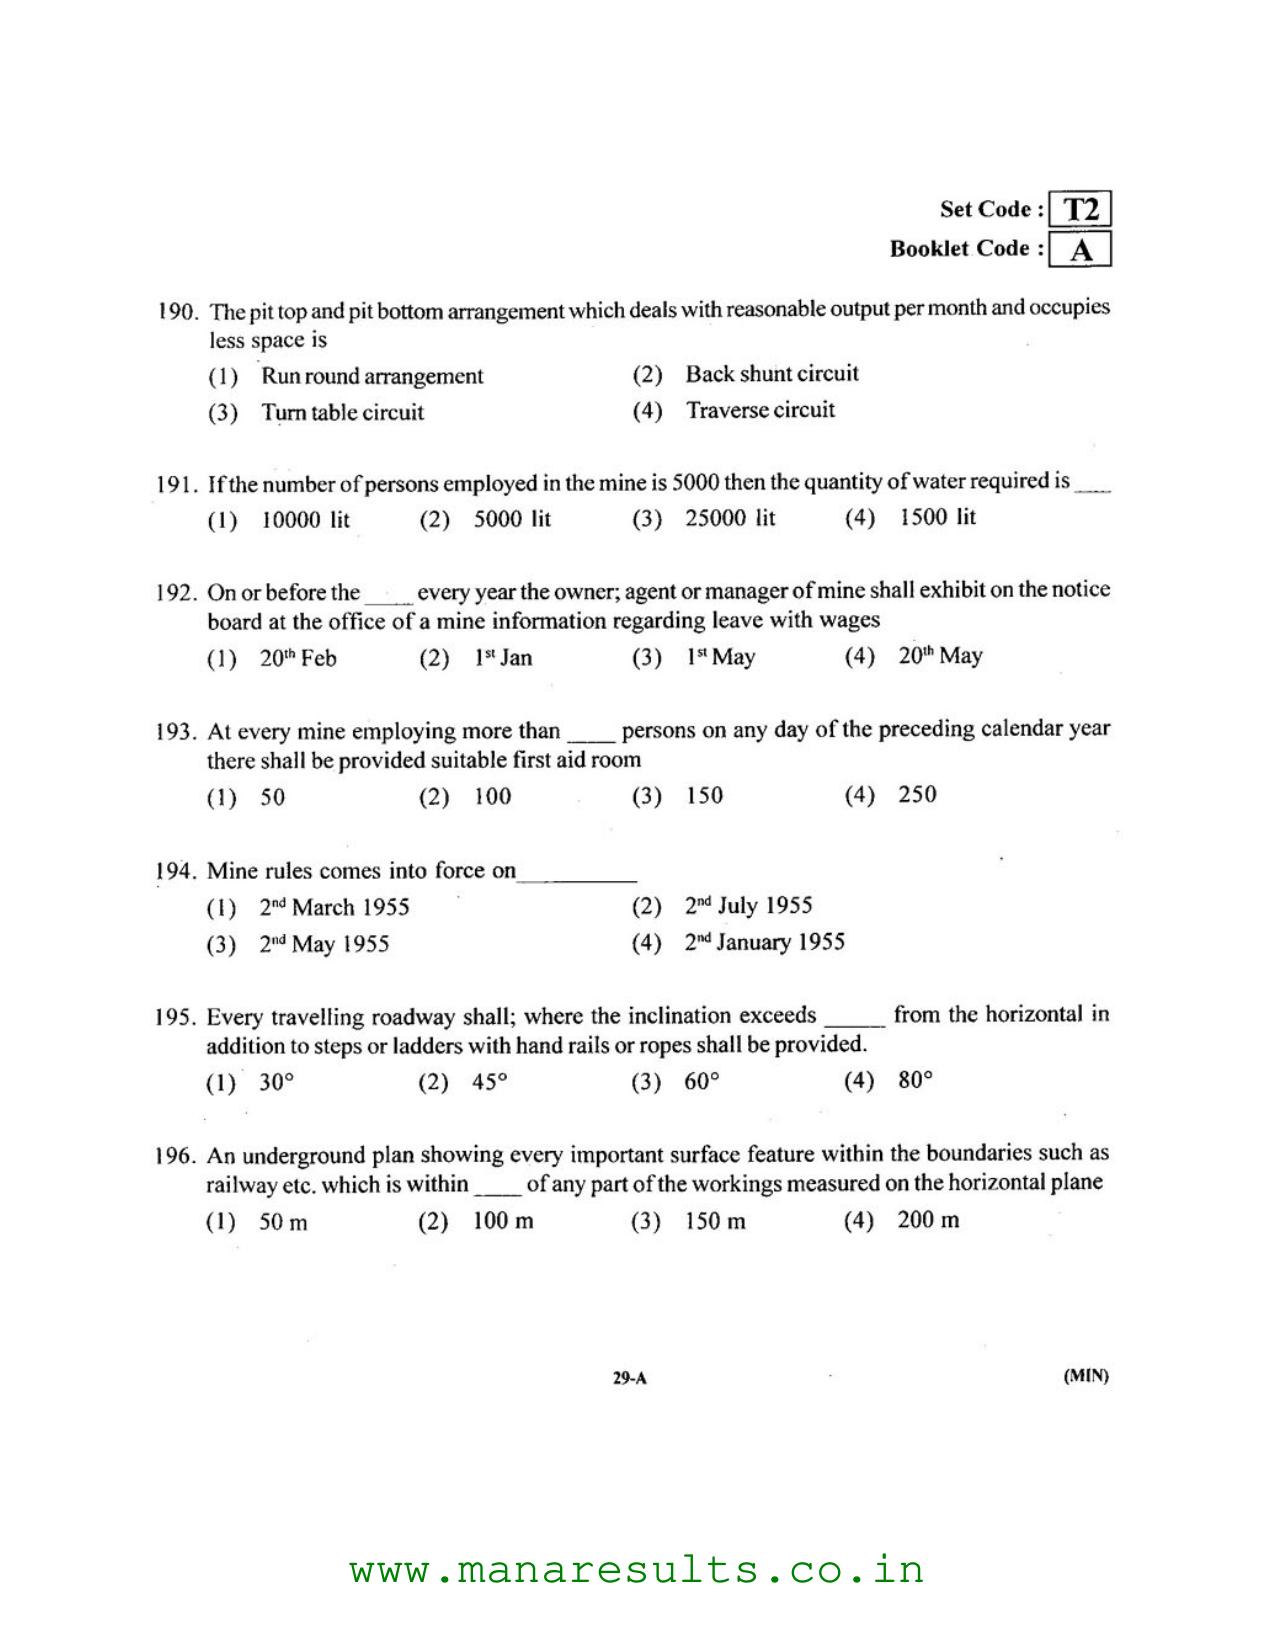 AP ECET 2016 Mining Engineering Old Previous Question Papers - Page 28